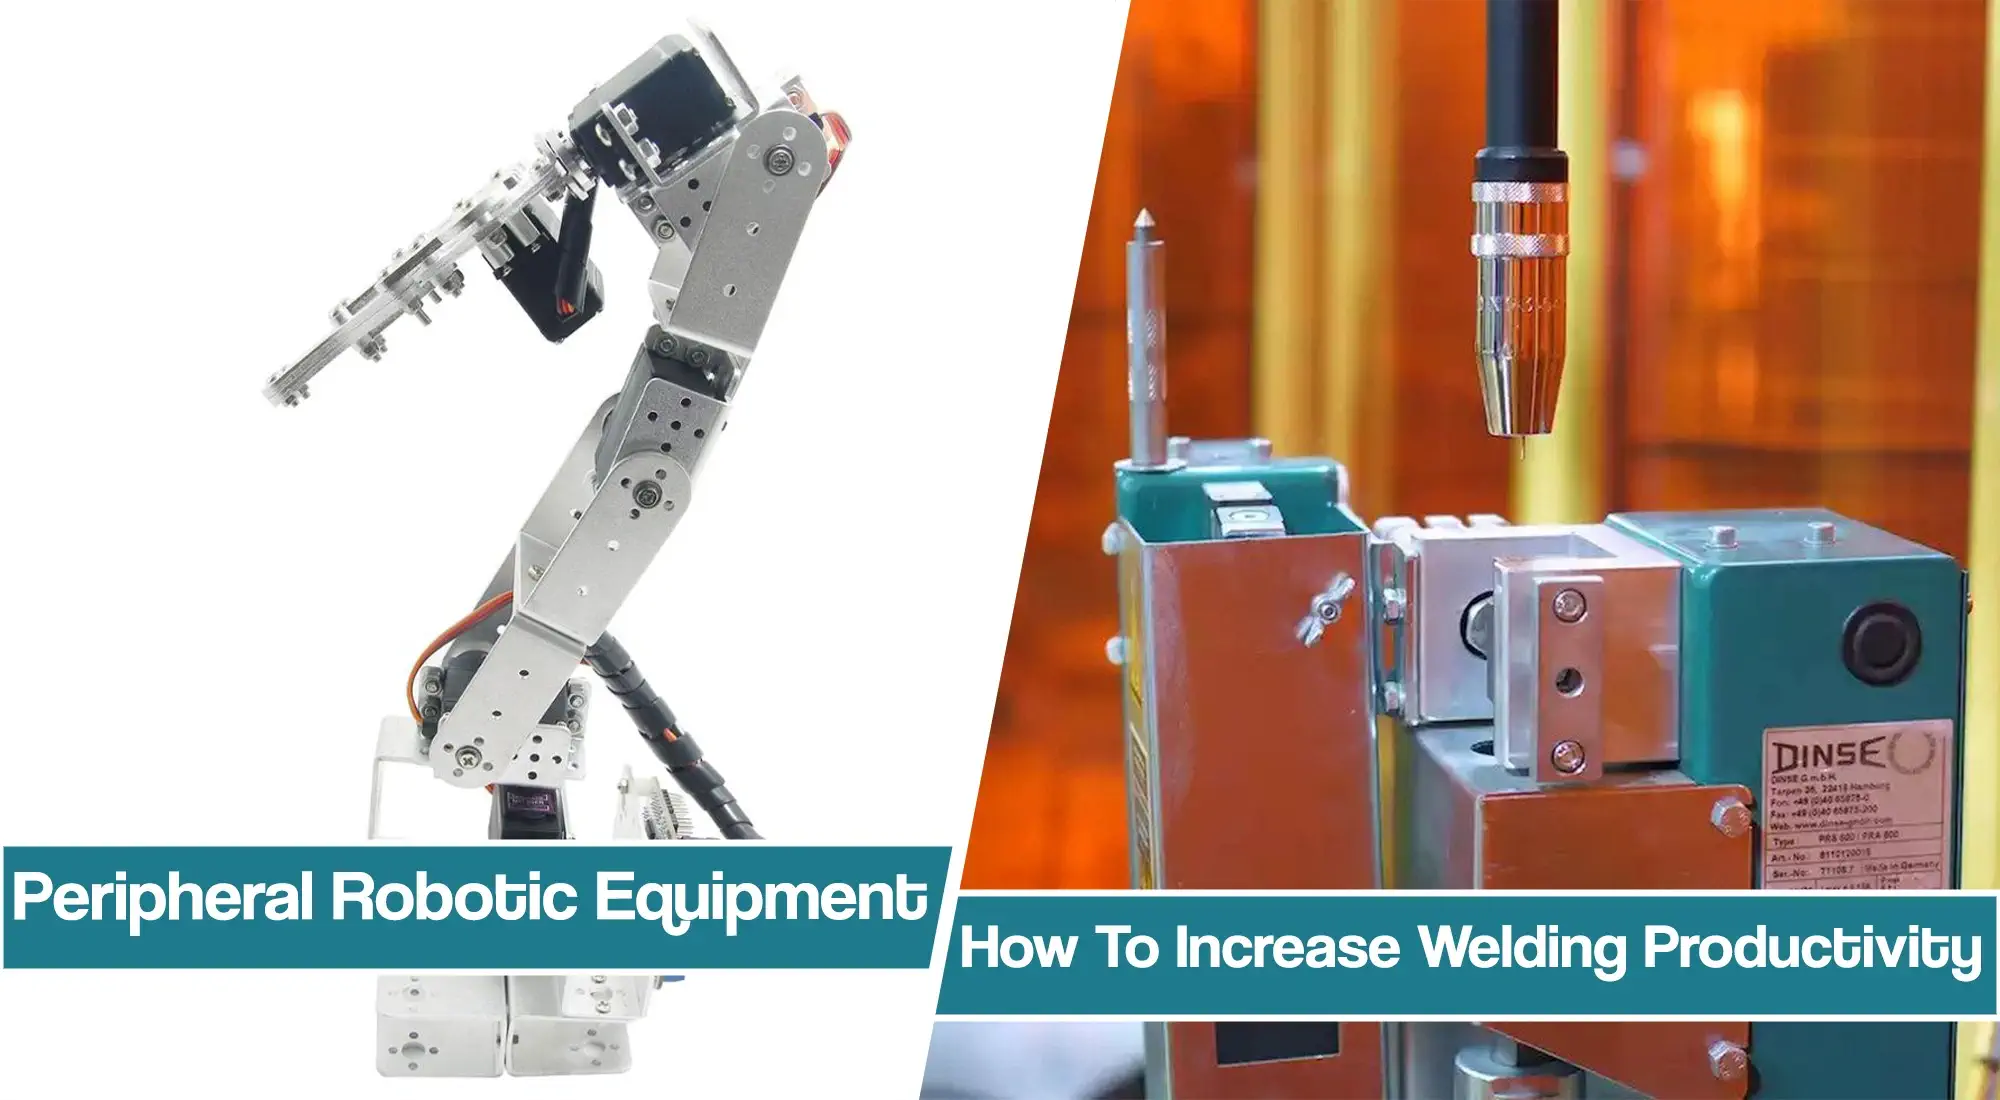 Importance Of Peripheral Robotic Welding Equipment